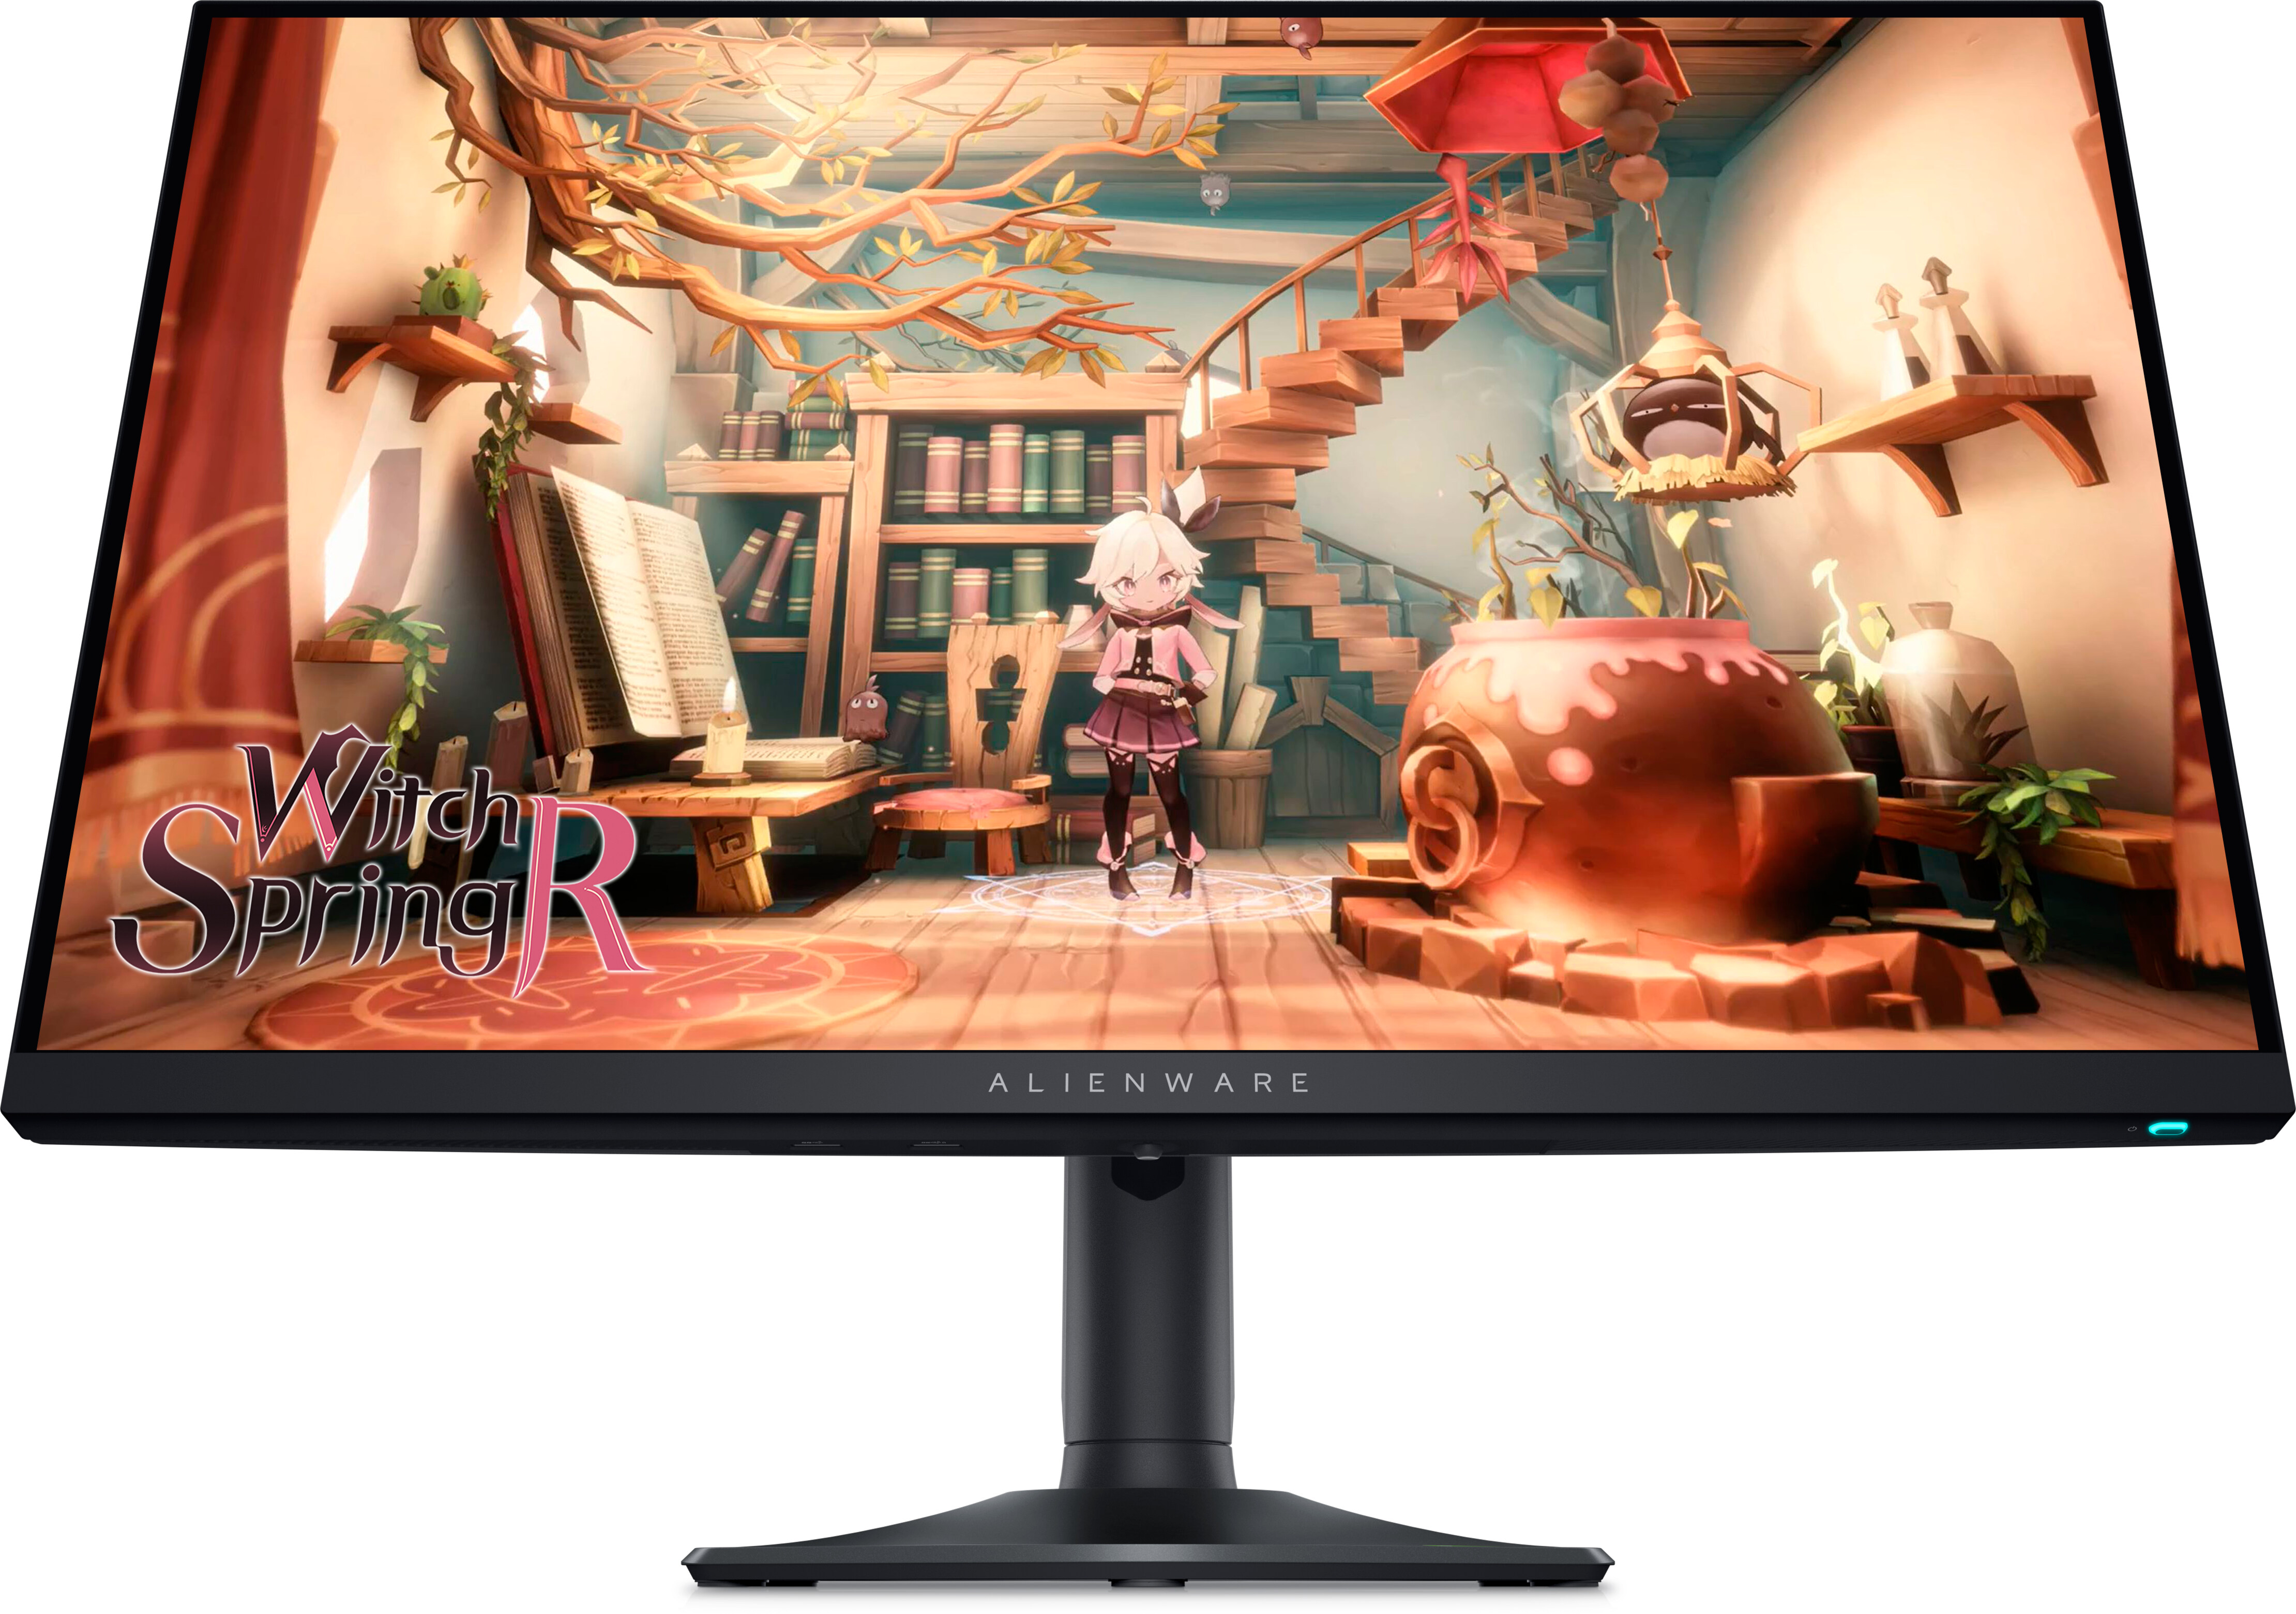 Alienware 27 inch Gaming Monitor (AW2724DM) - Computer Monitors